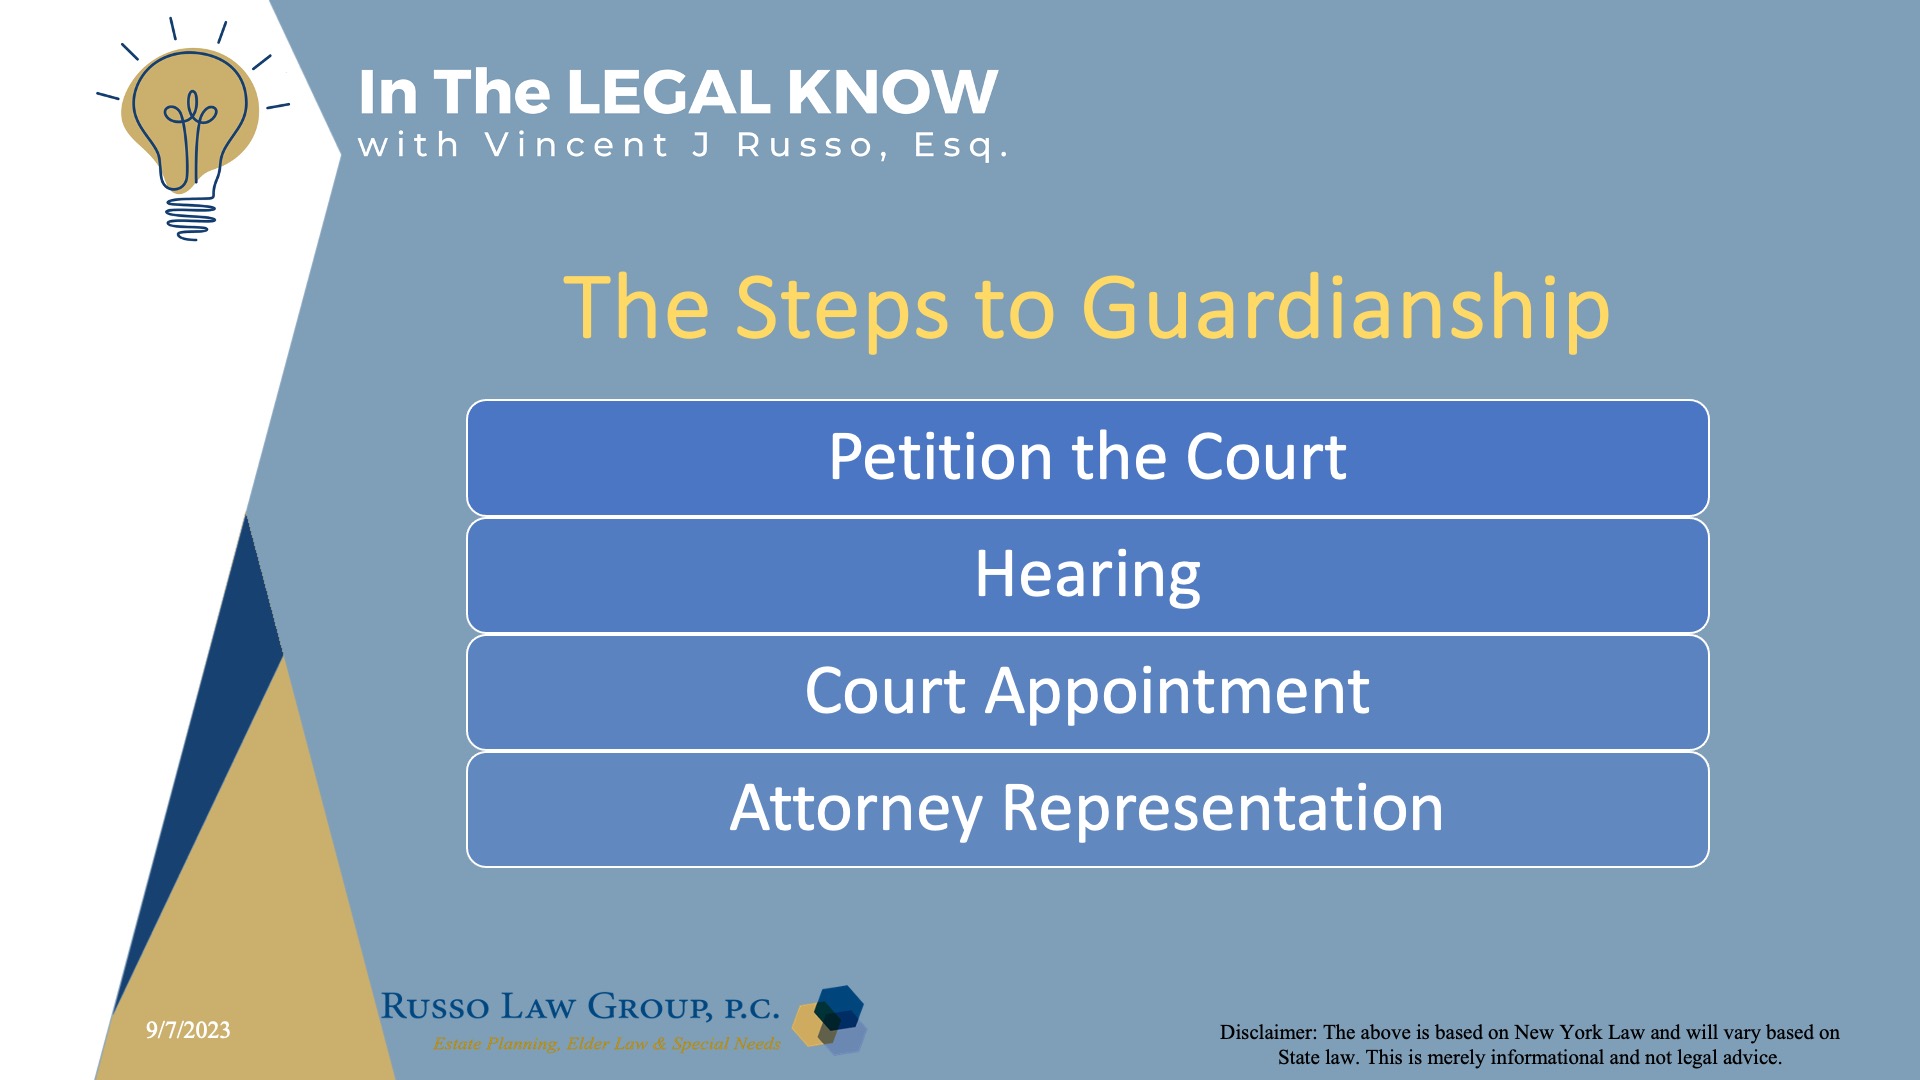 The Steps to Guardianship